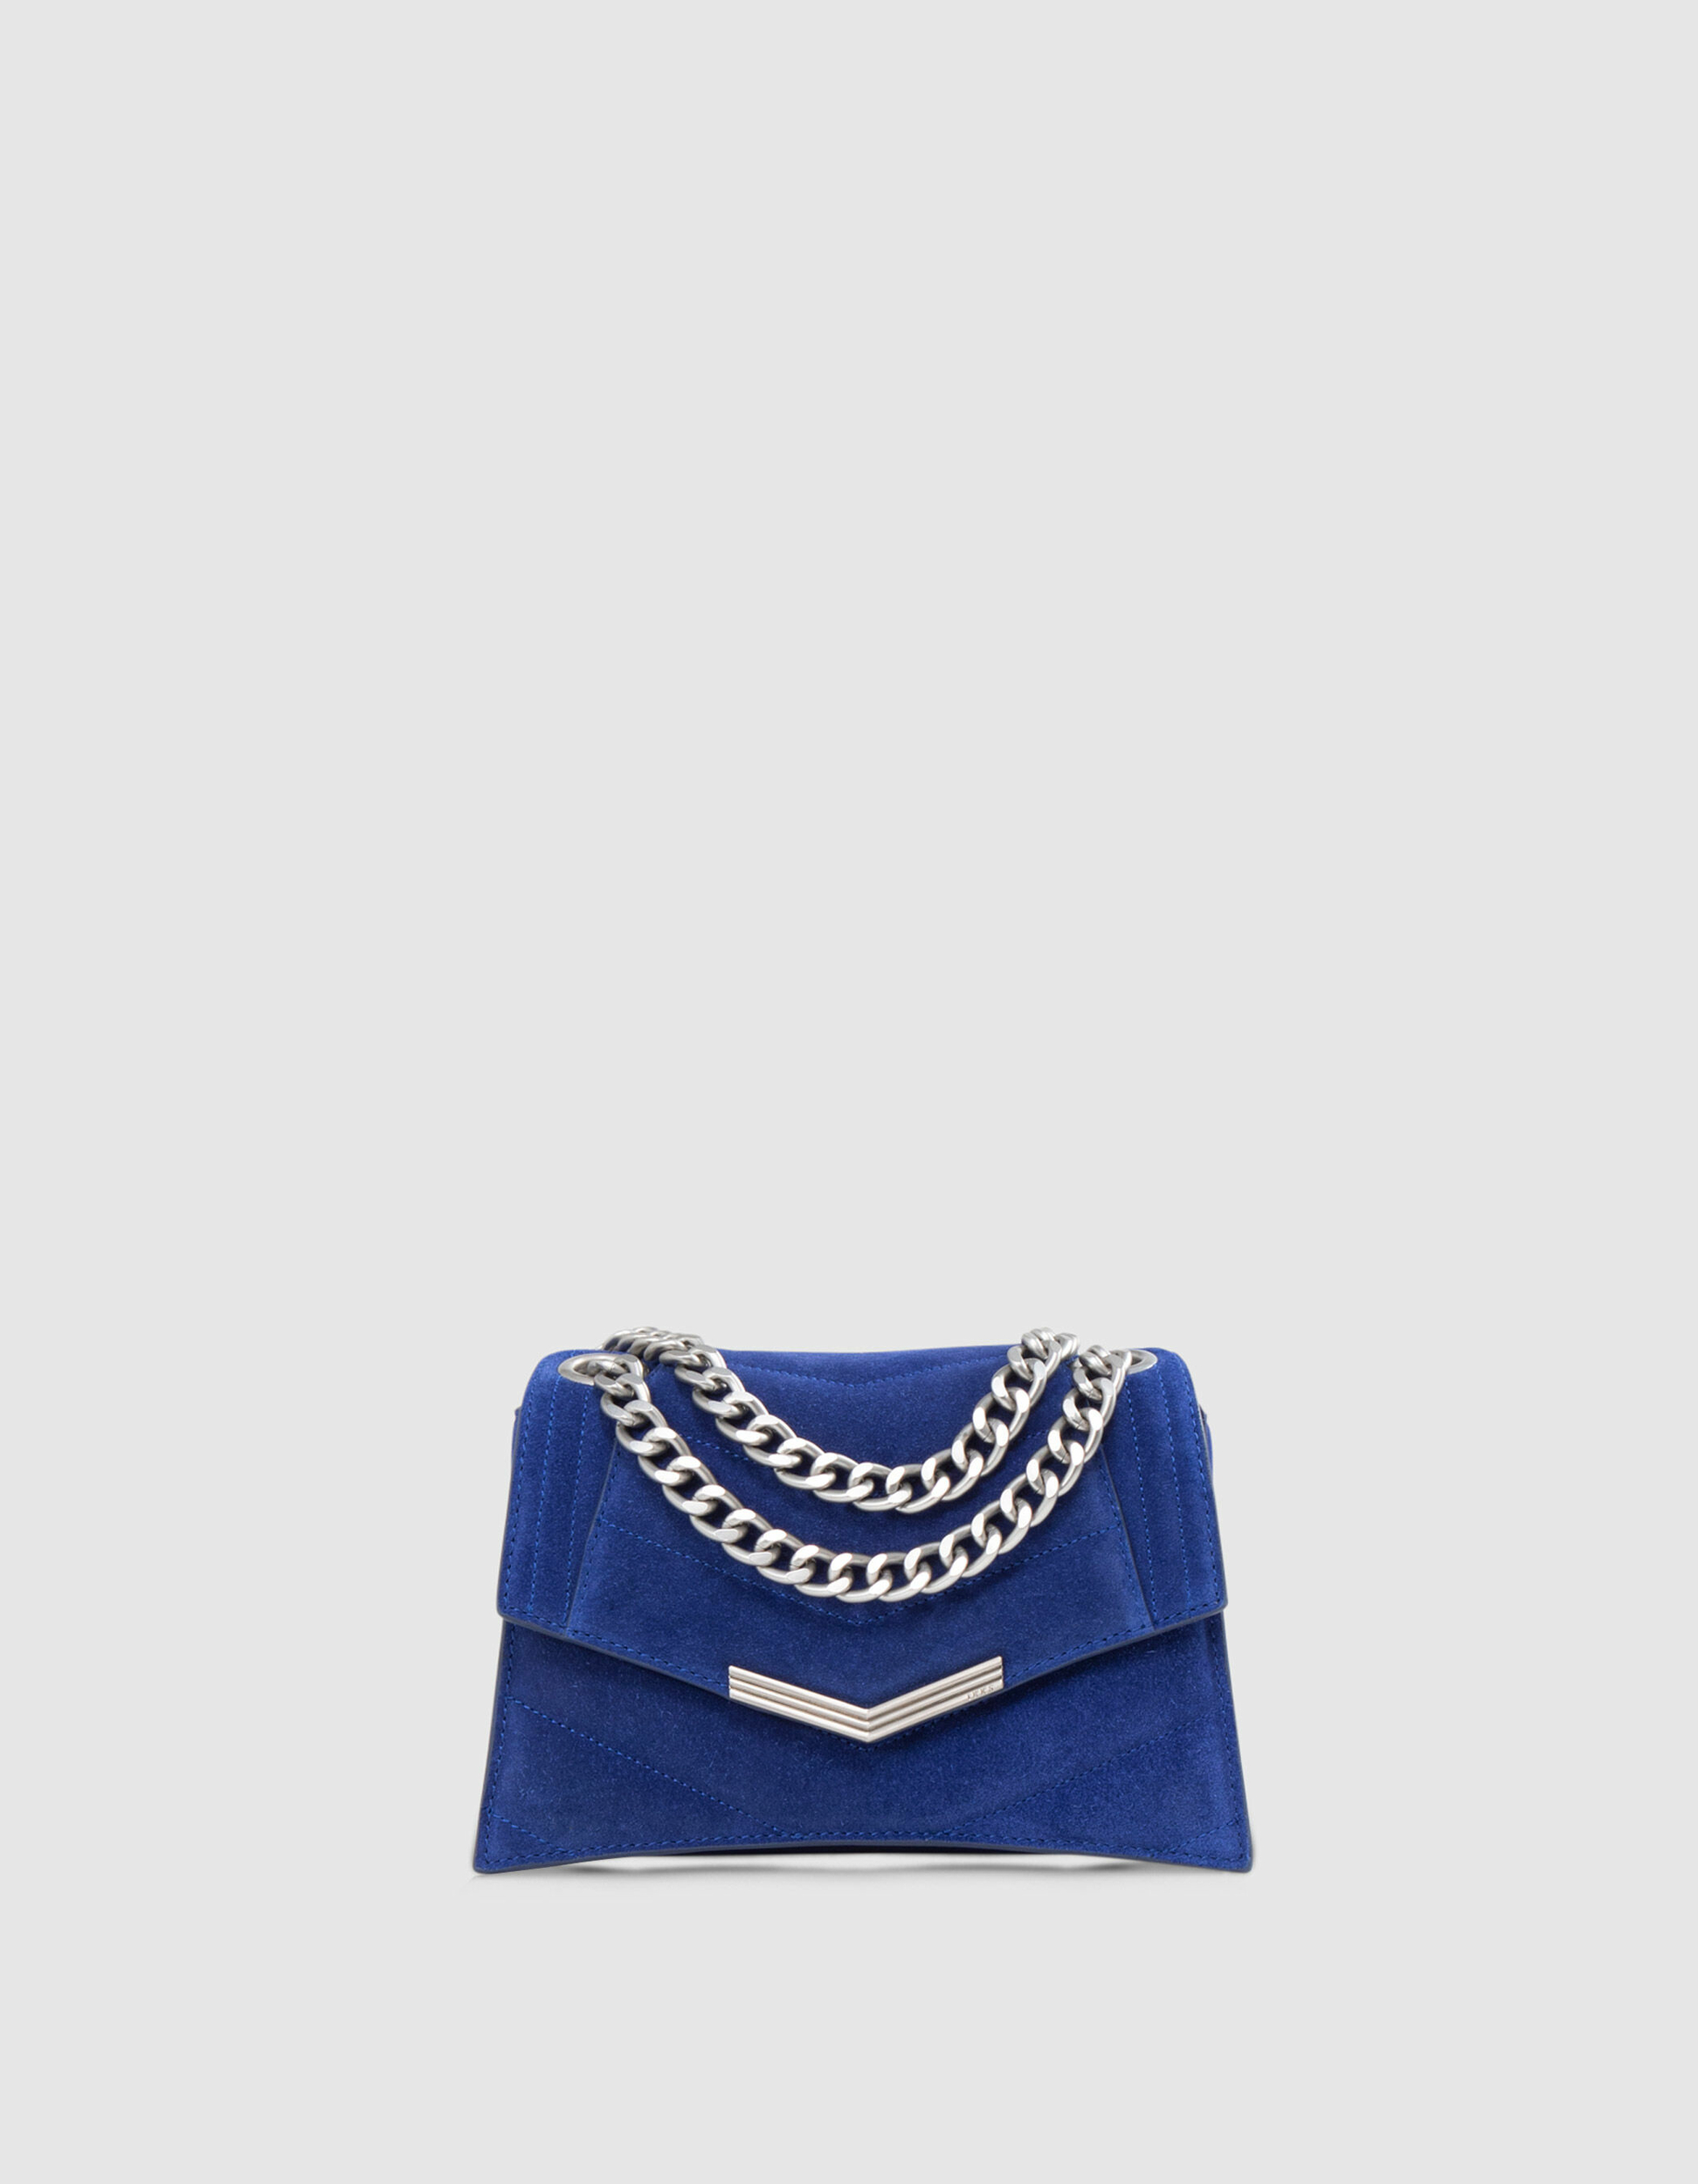 IKKS-SAC~THE~1~~POP~COLOR~COBALT~CUIR~VELOURS~MATELASSE~TAILLE~S~FEMME-BY95679-45_1